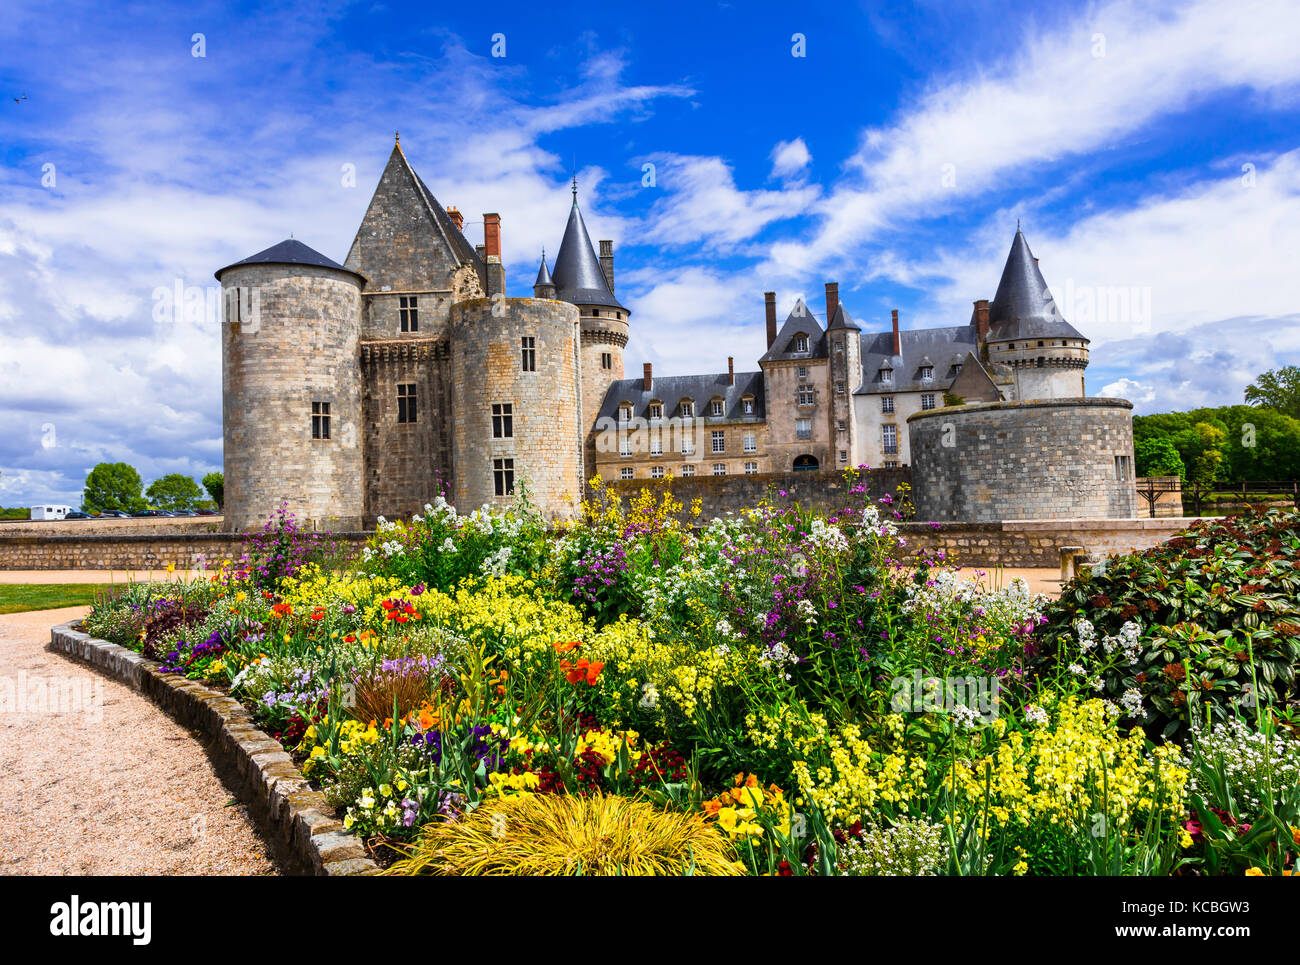 Great castles of Loire valley - Sully-sur-Loire. France Stock Photo